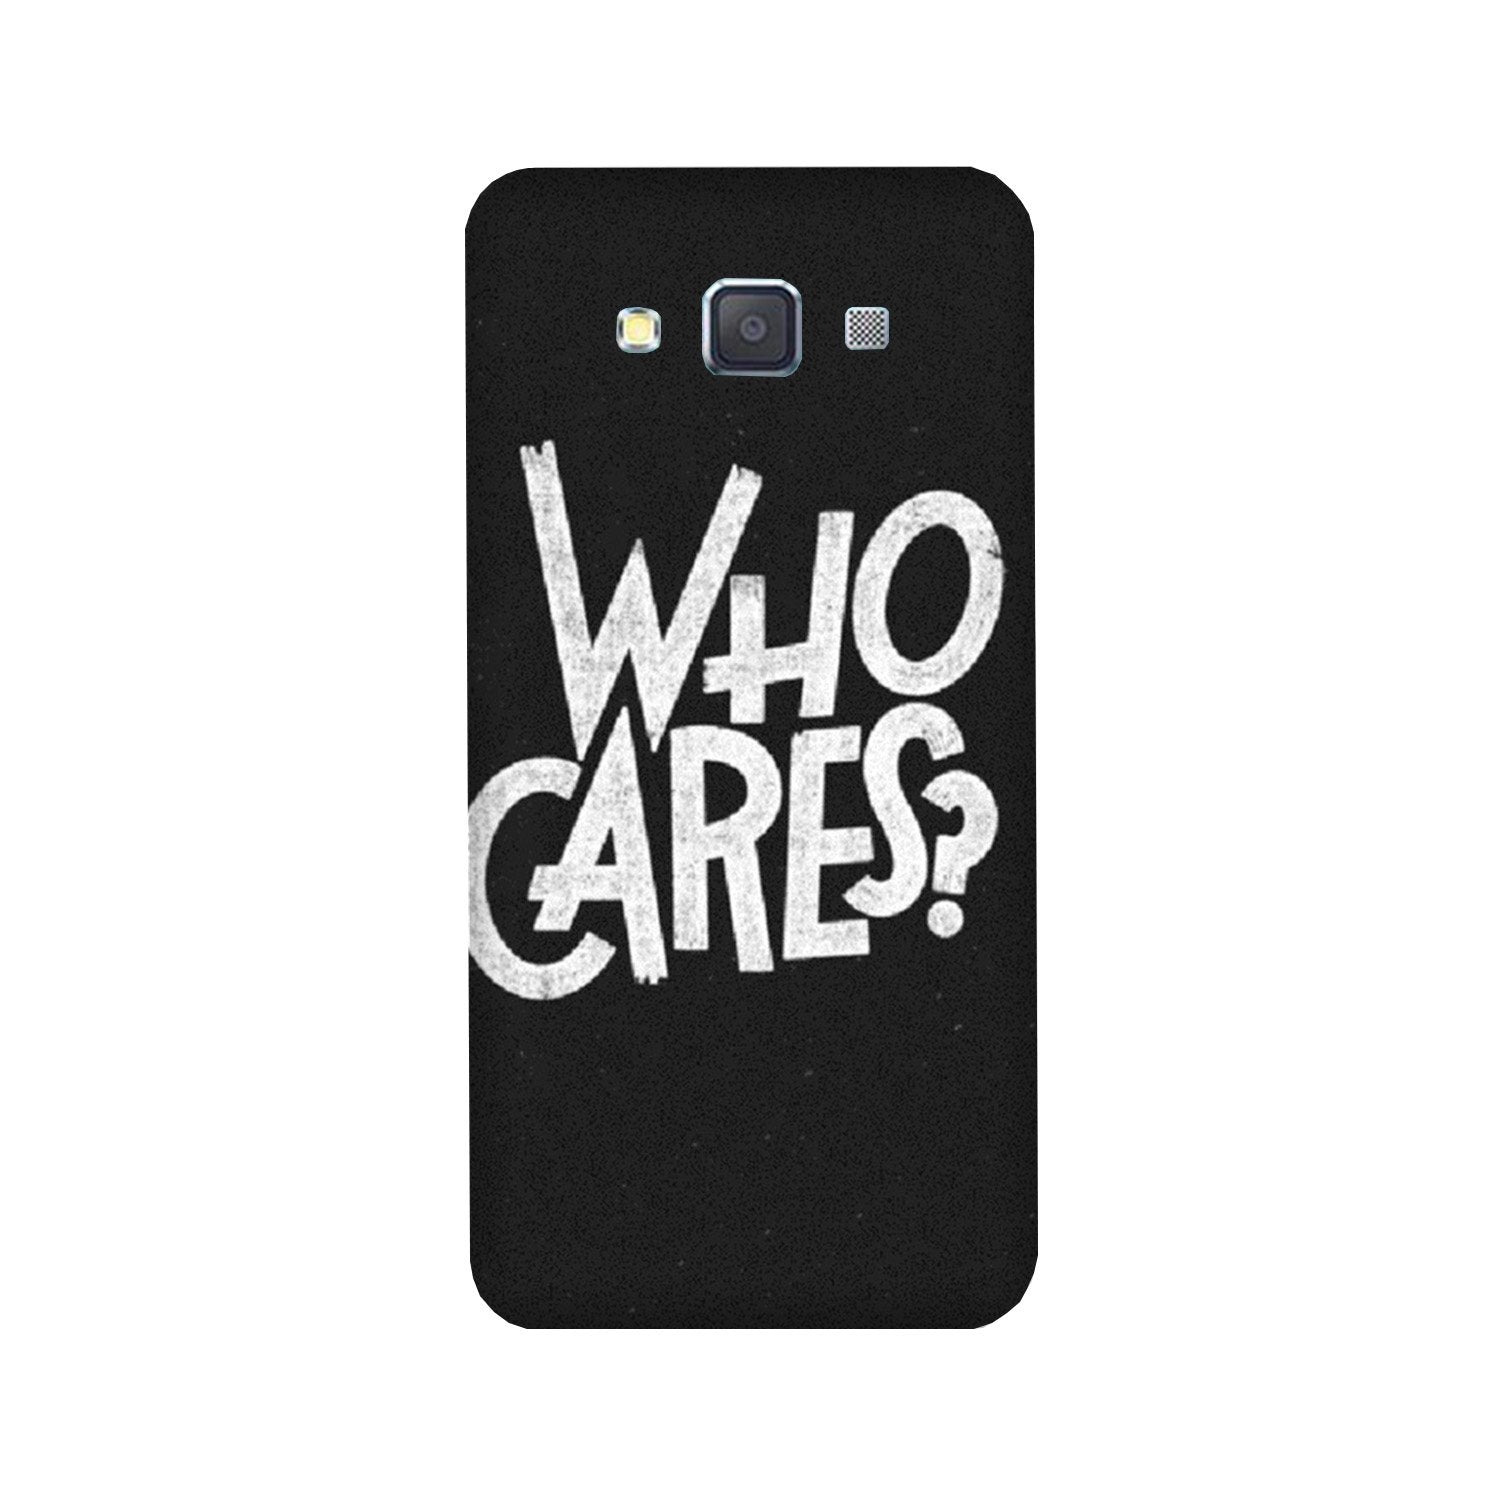 Who Cares Case for Galaxy Grand Max